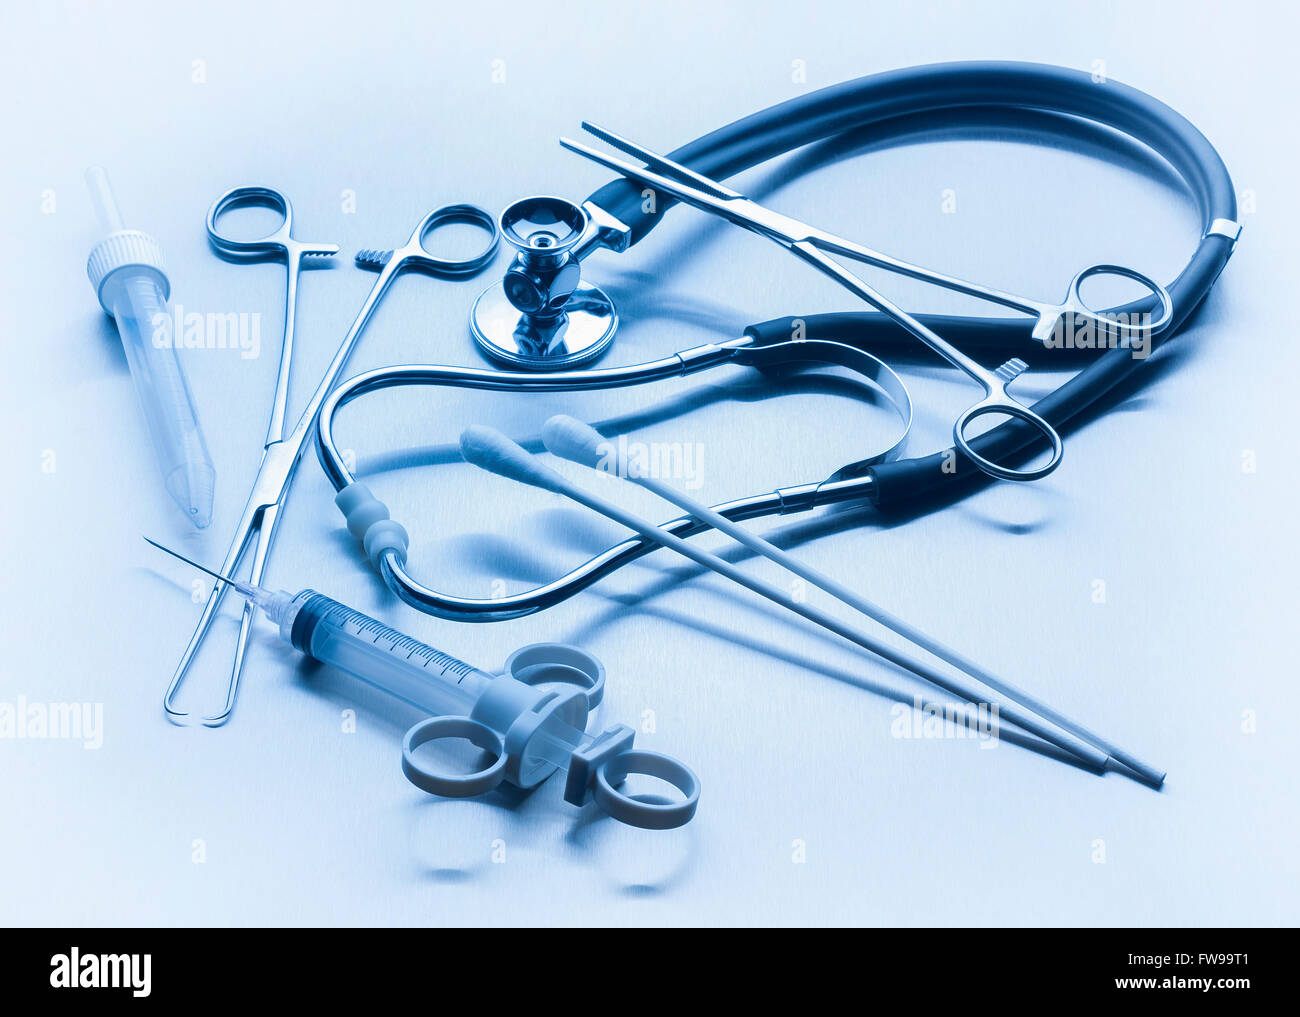 Medical instruments used by doctors in hospitals Stock Photo